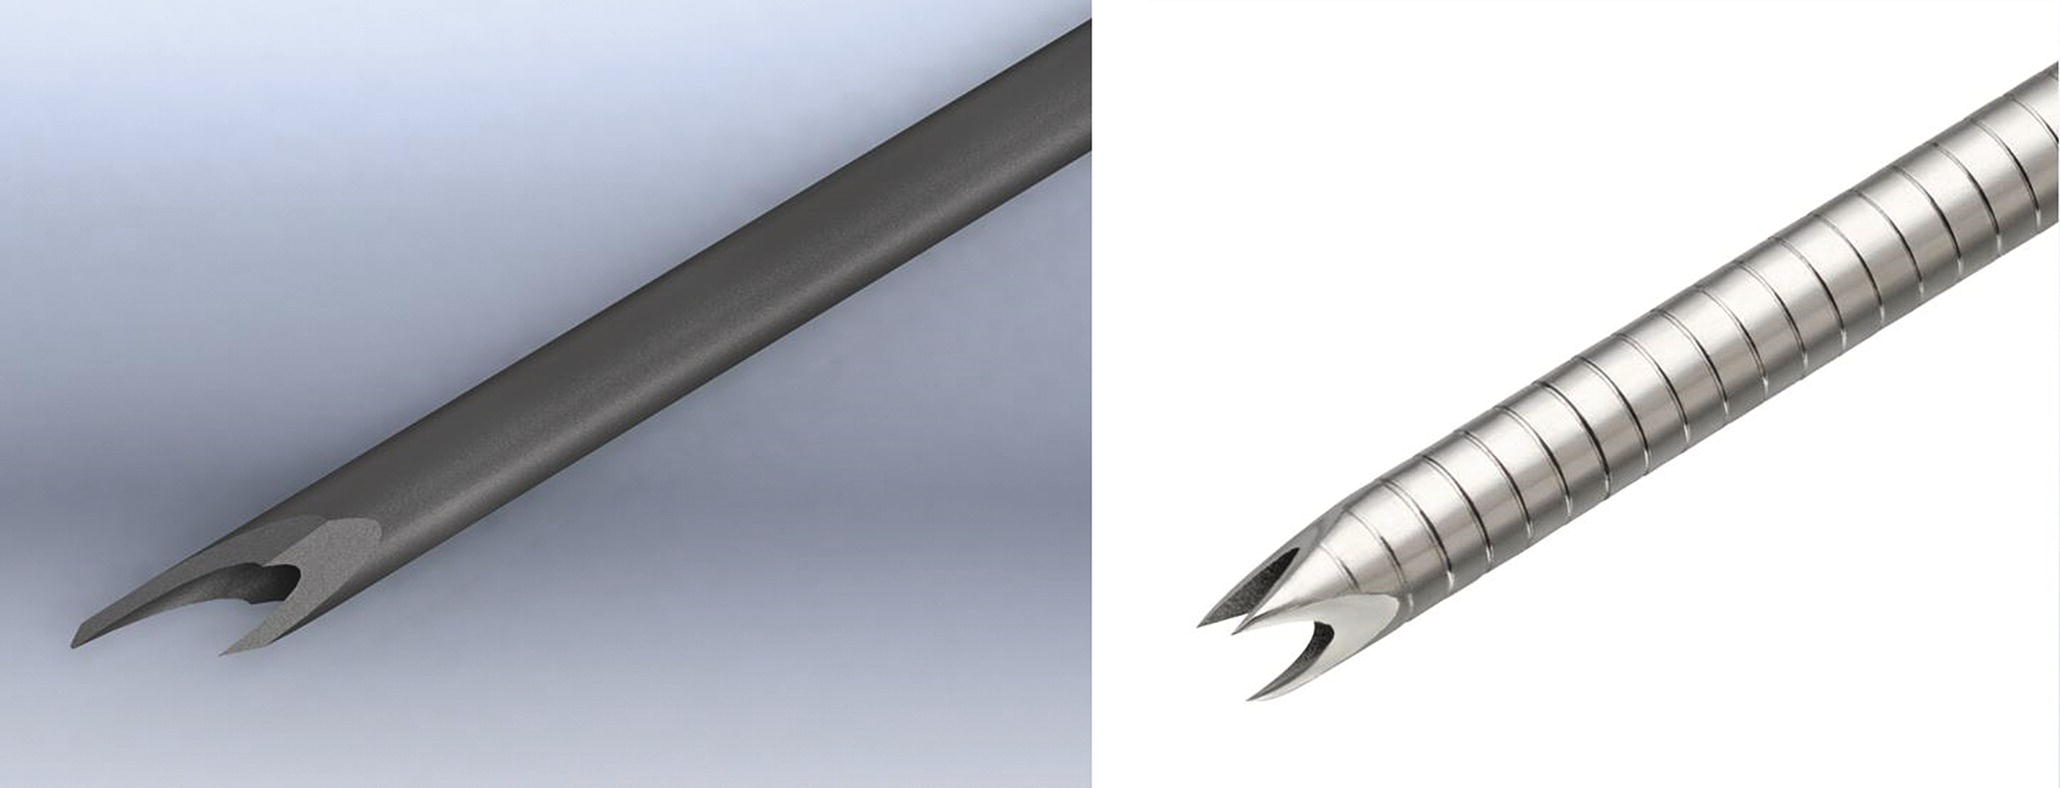 Photo depicts close-up of the tips of the core needles used for EUS-LB: (left) SharkCore needle; (right) Acquire needle.